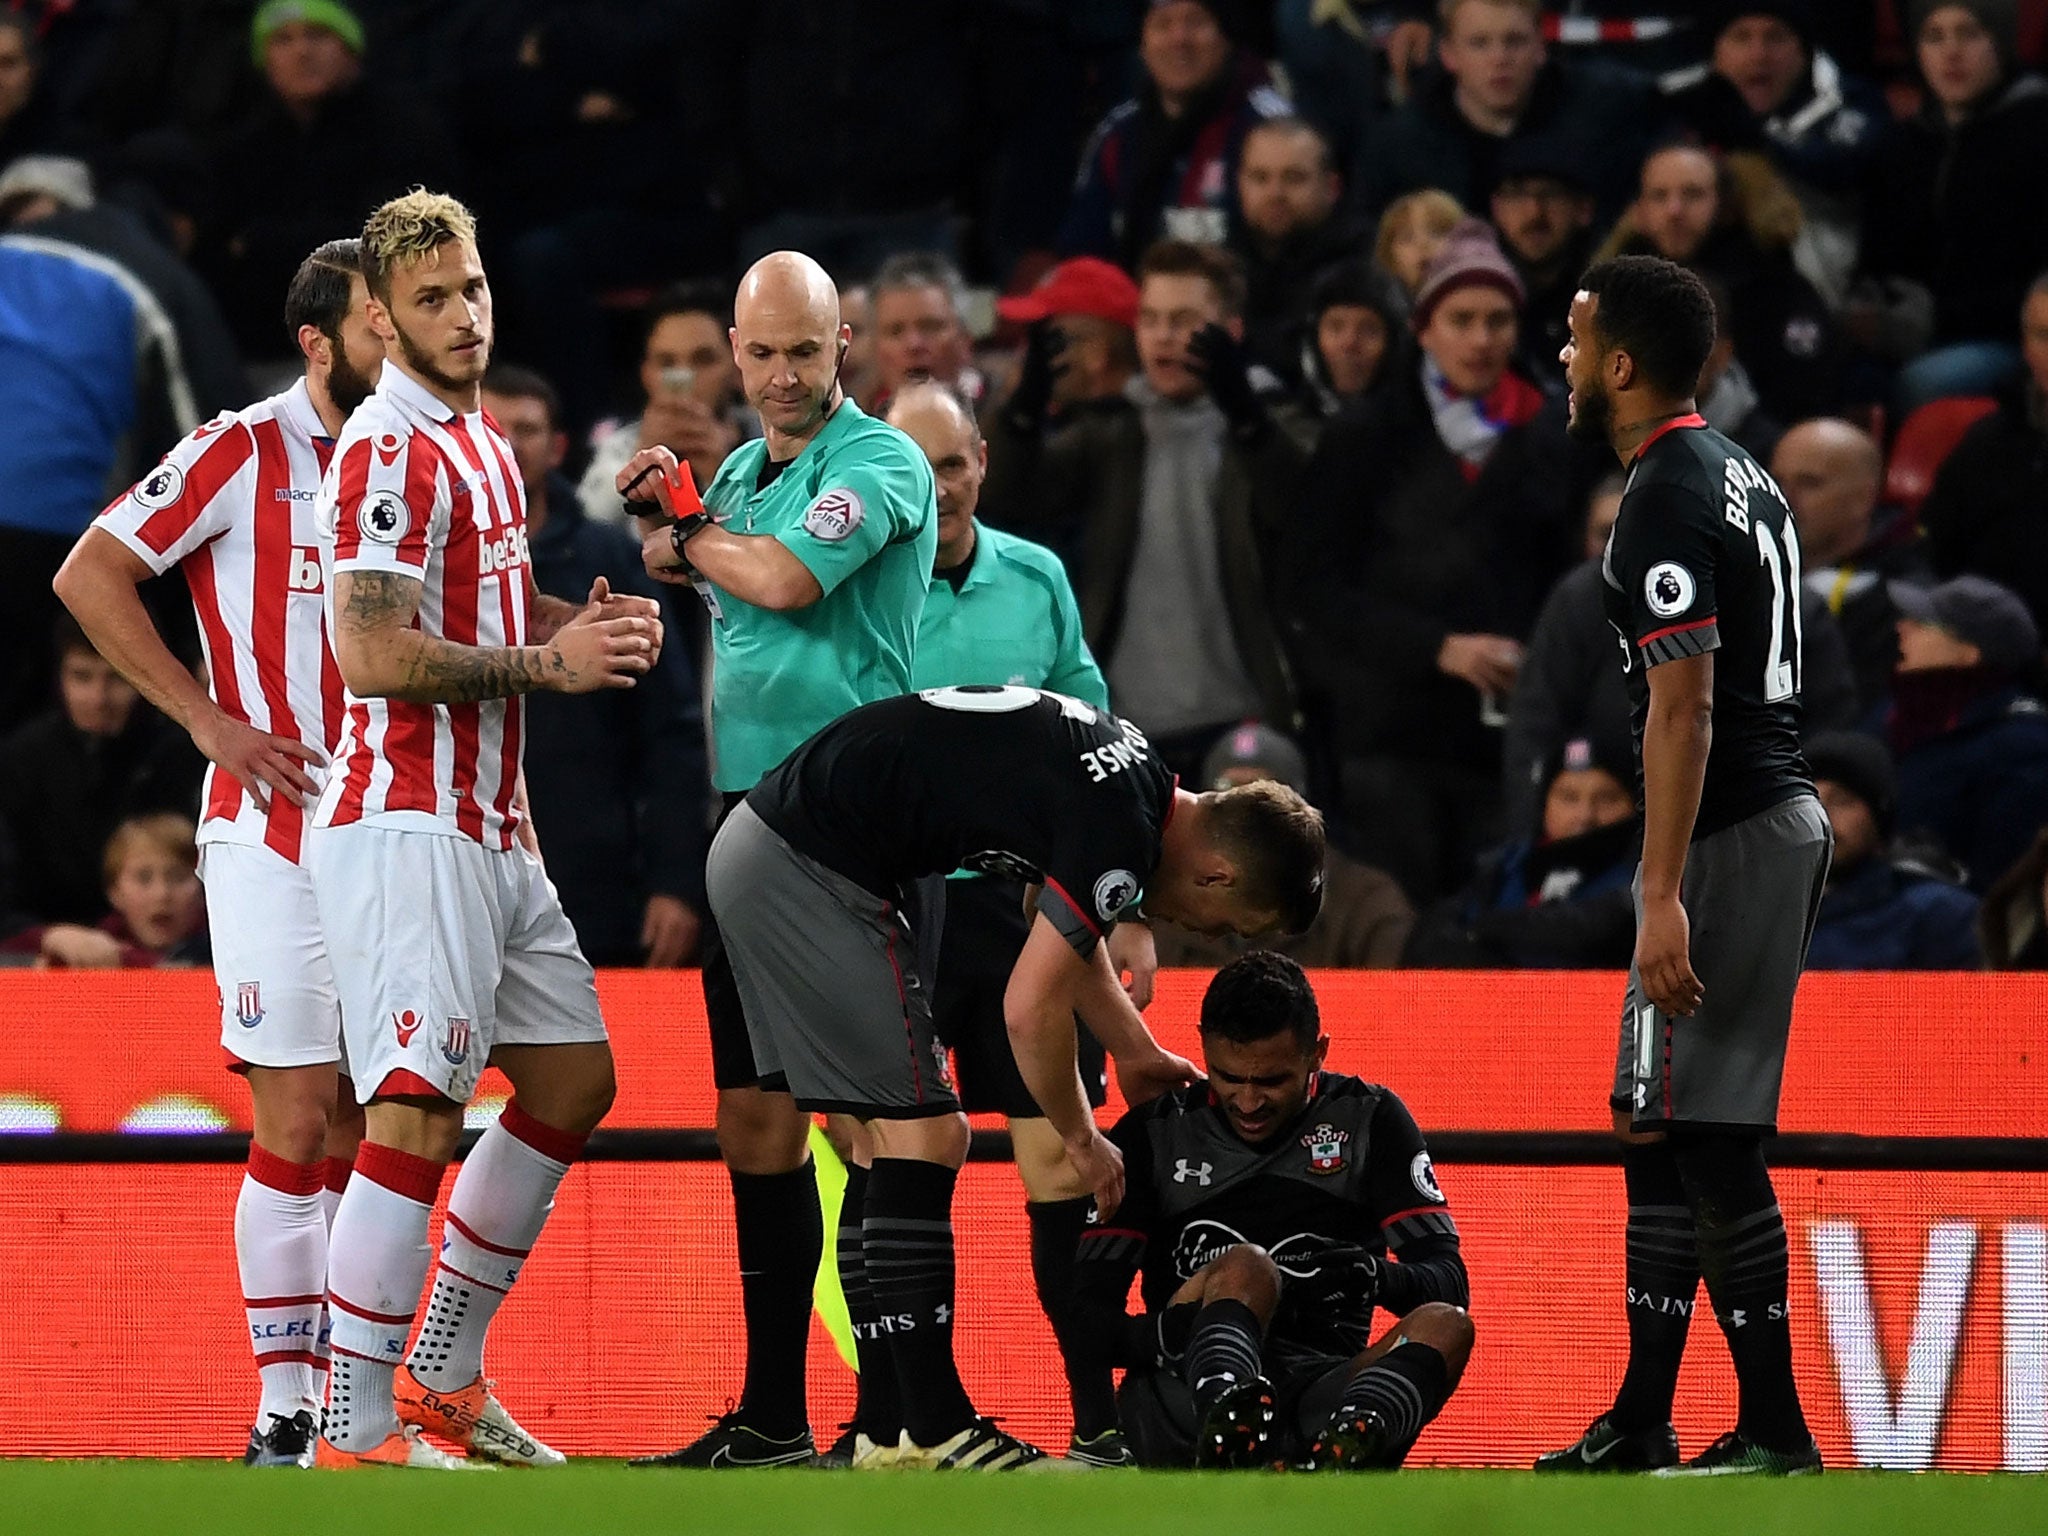 Marko Arnautovic is shown red for a dangerous challenge early on in the game